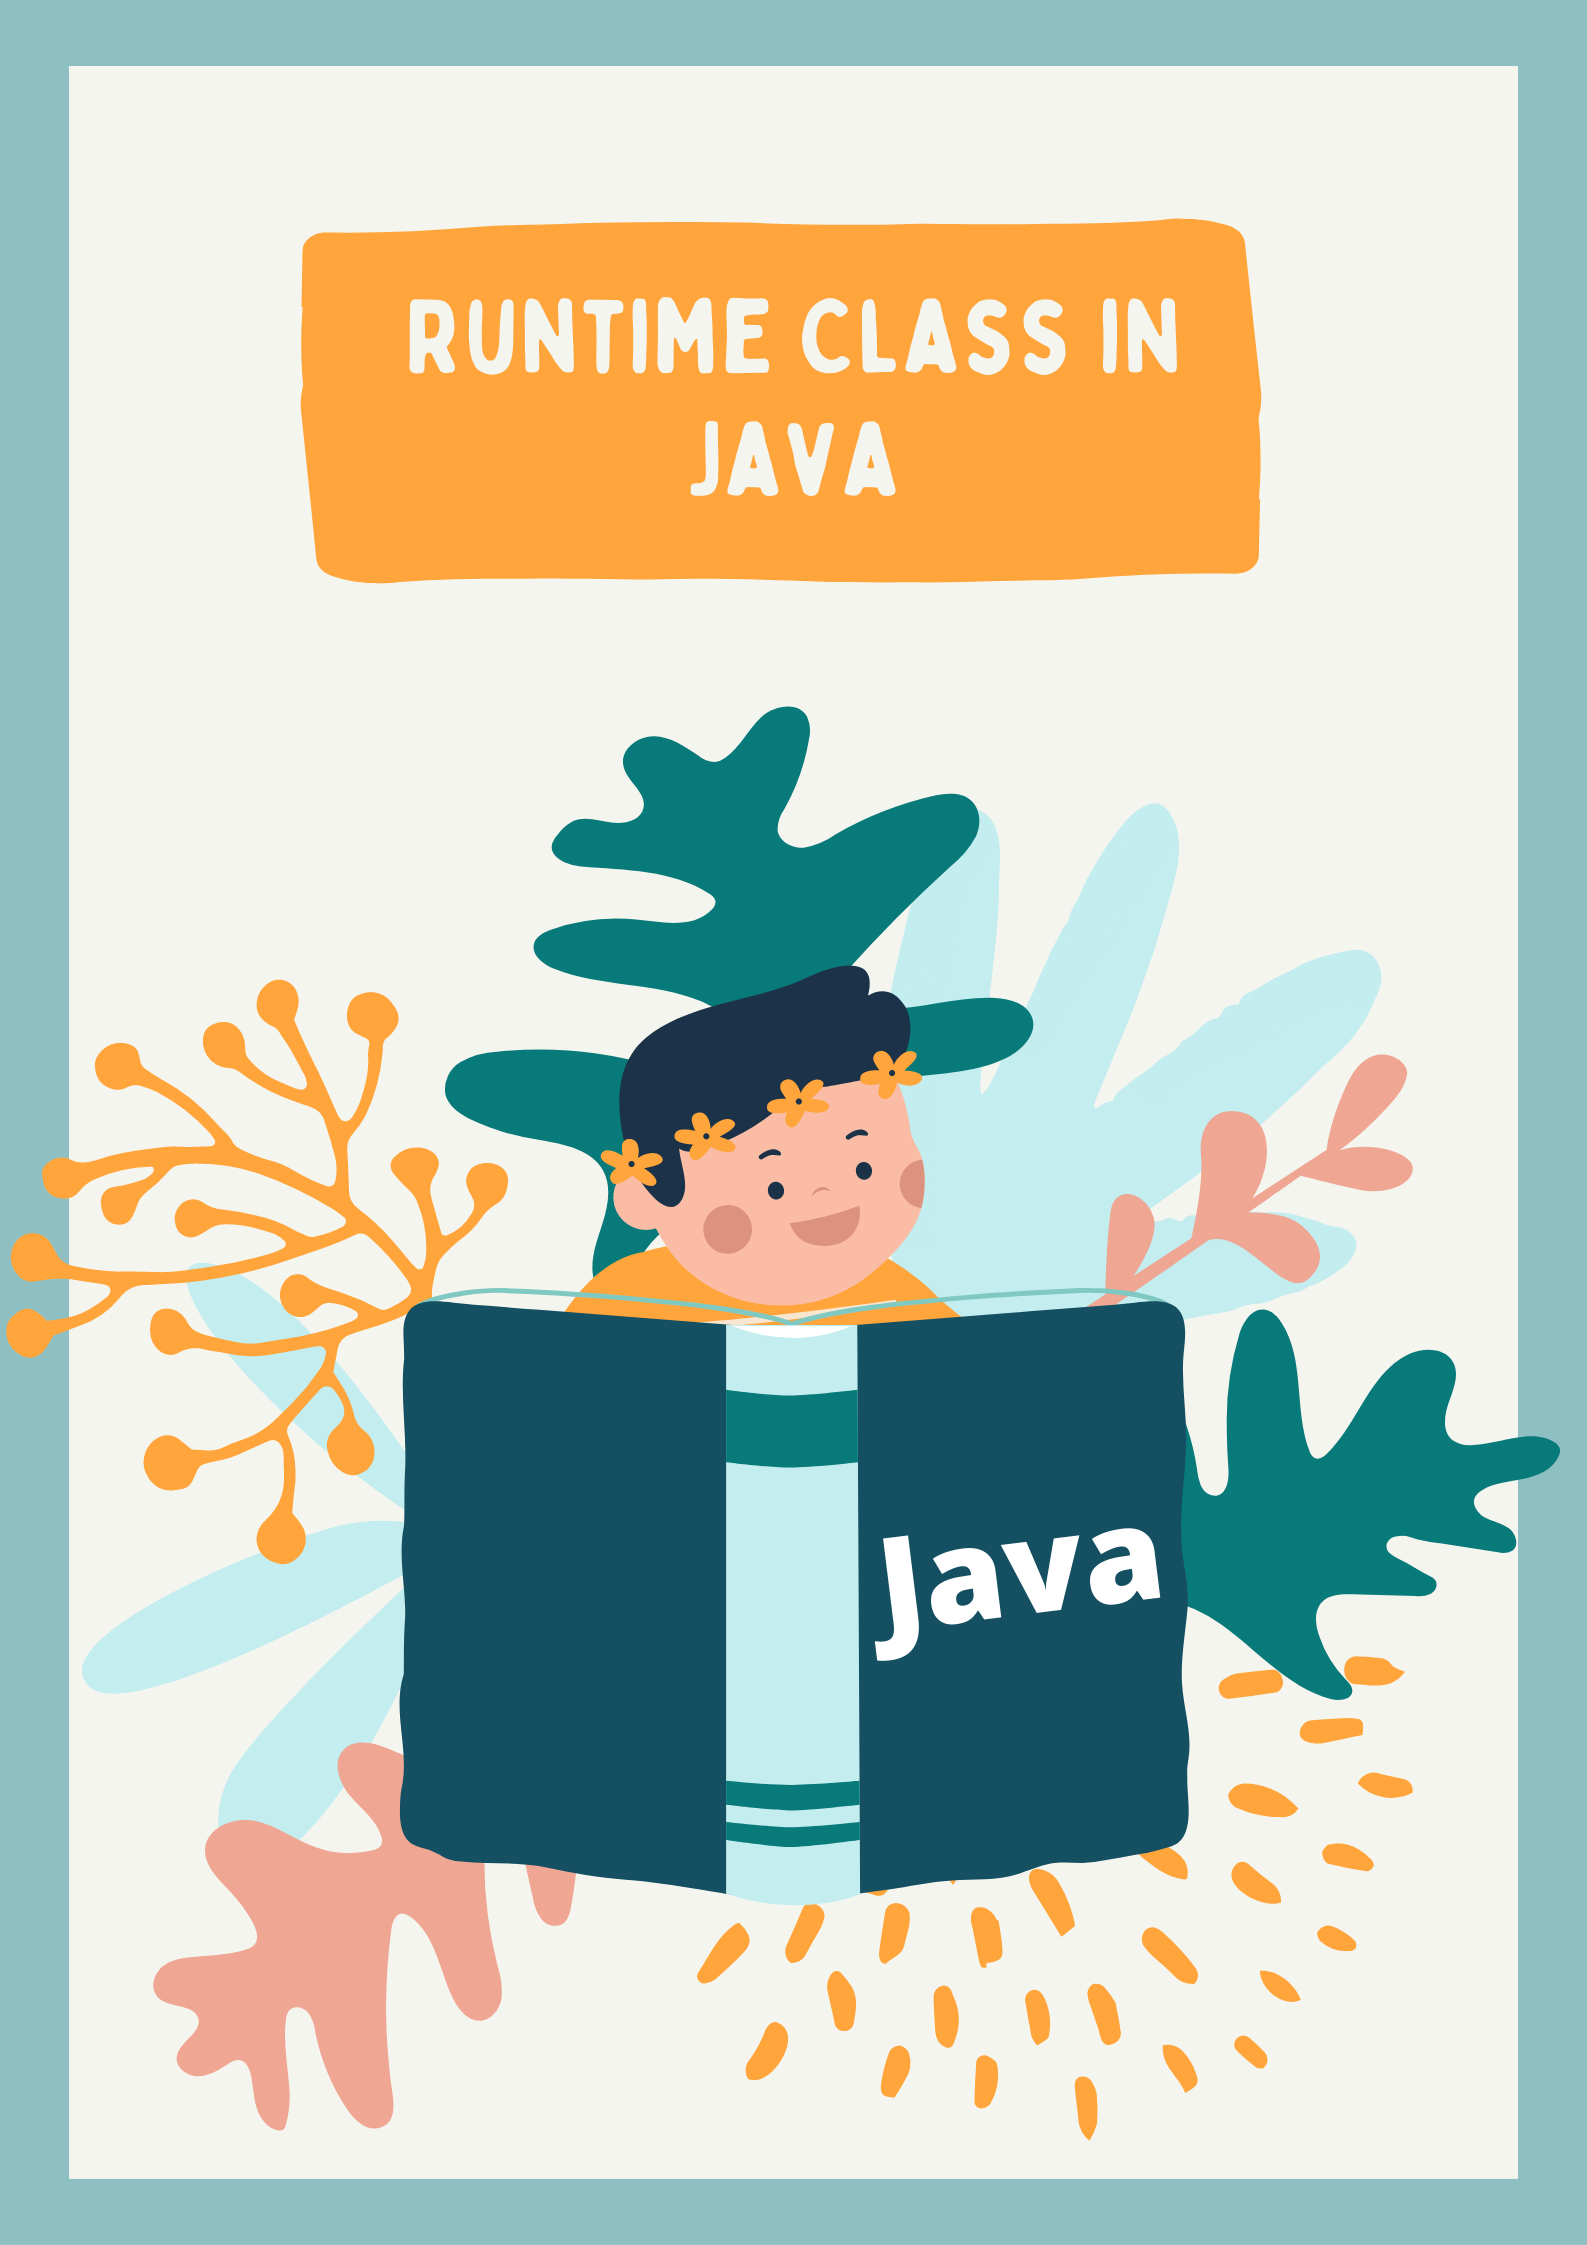 RunTime Class in Java